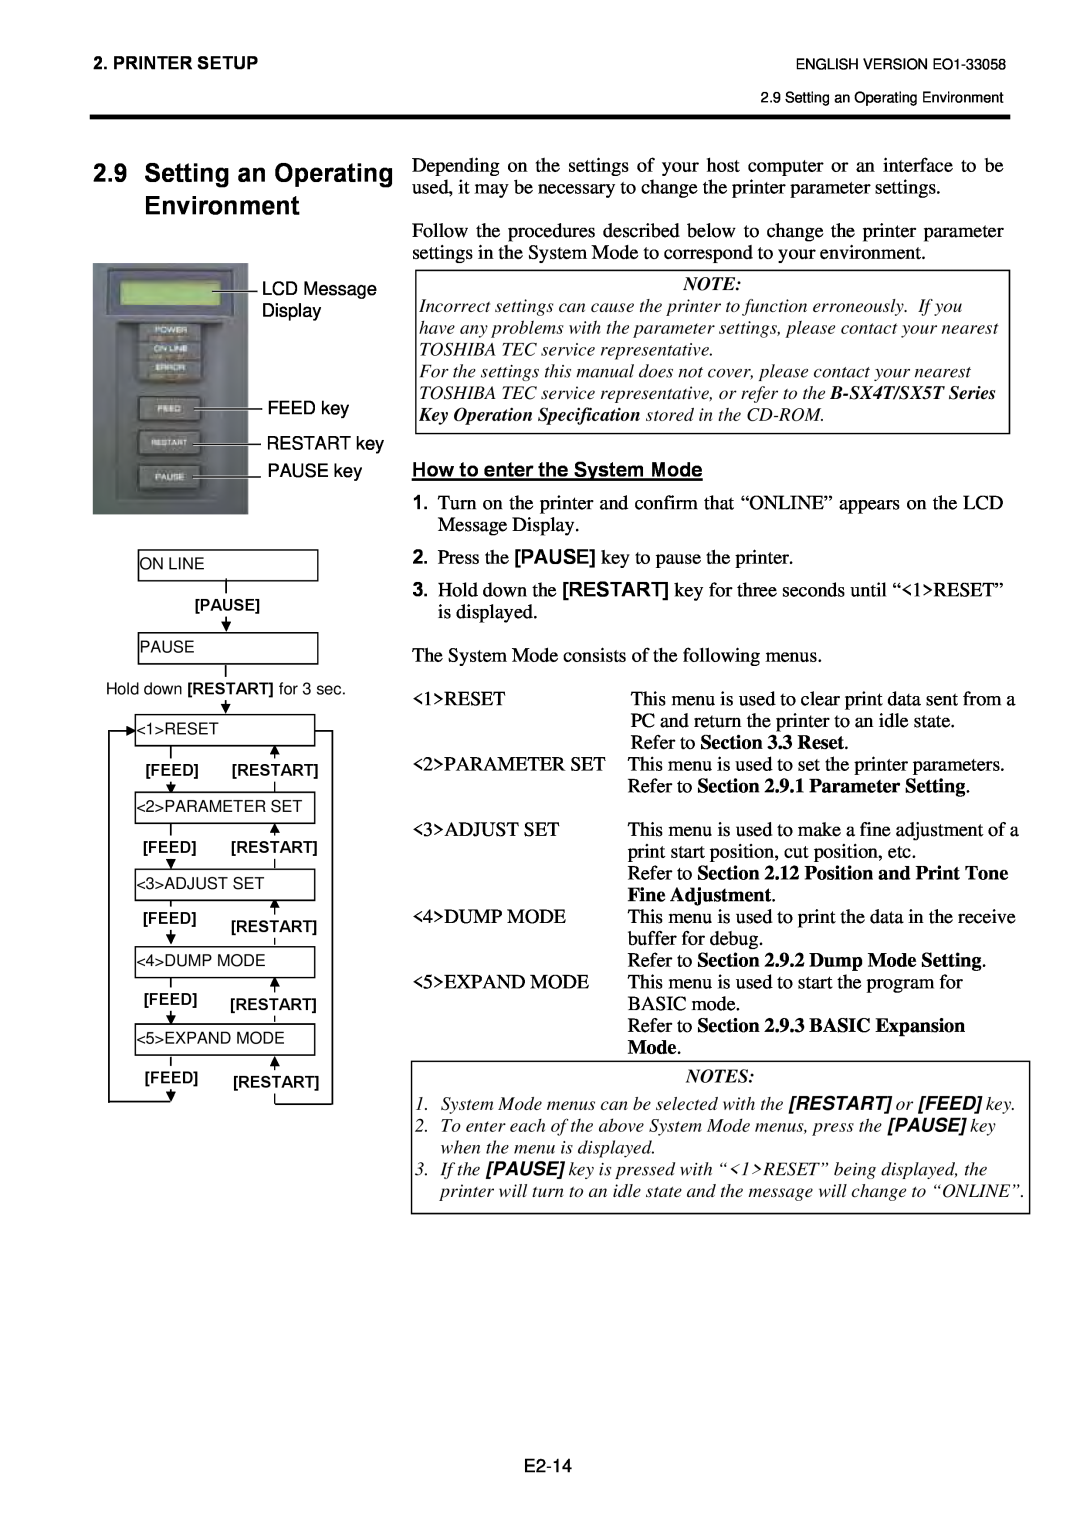 Toshiba B-SX4T Setting an Operating Environment, Refer to .3 Reset, Refer to .9.1 Parameter Setting, Fine Adjustment, Mode 